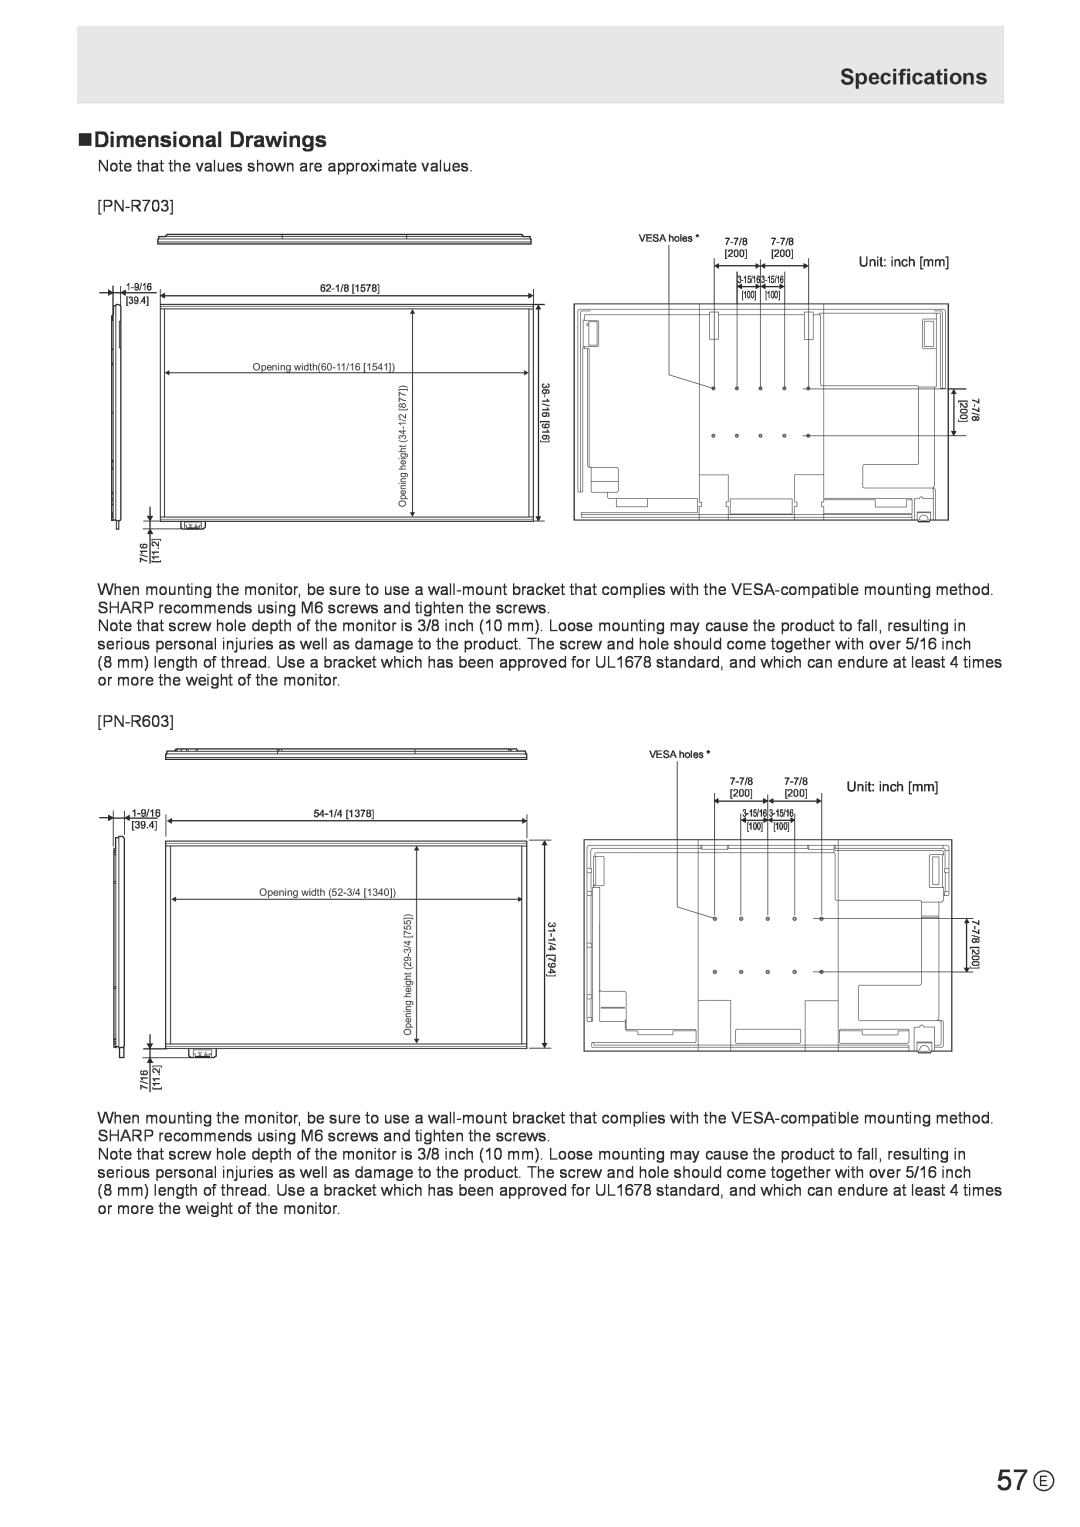 Sharp PN-R703, PN-R603 operation manual 57 E, nDimensional Drawings, Specifications 